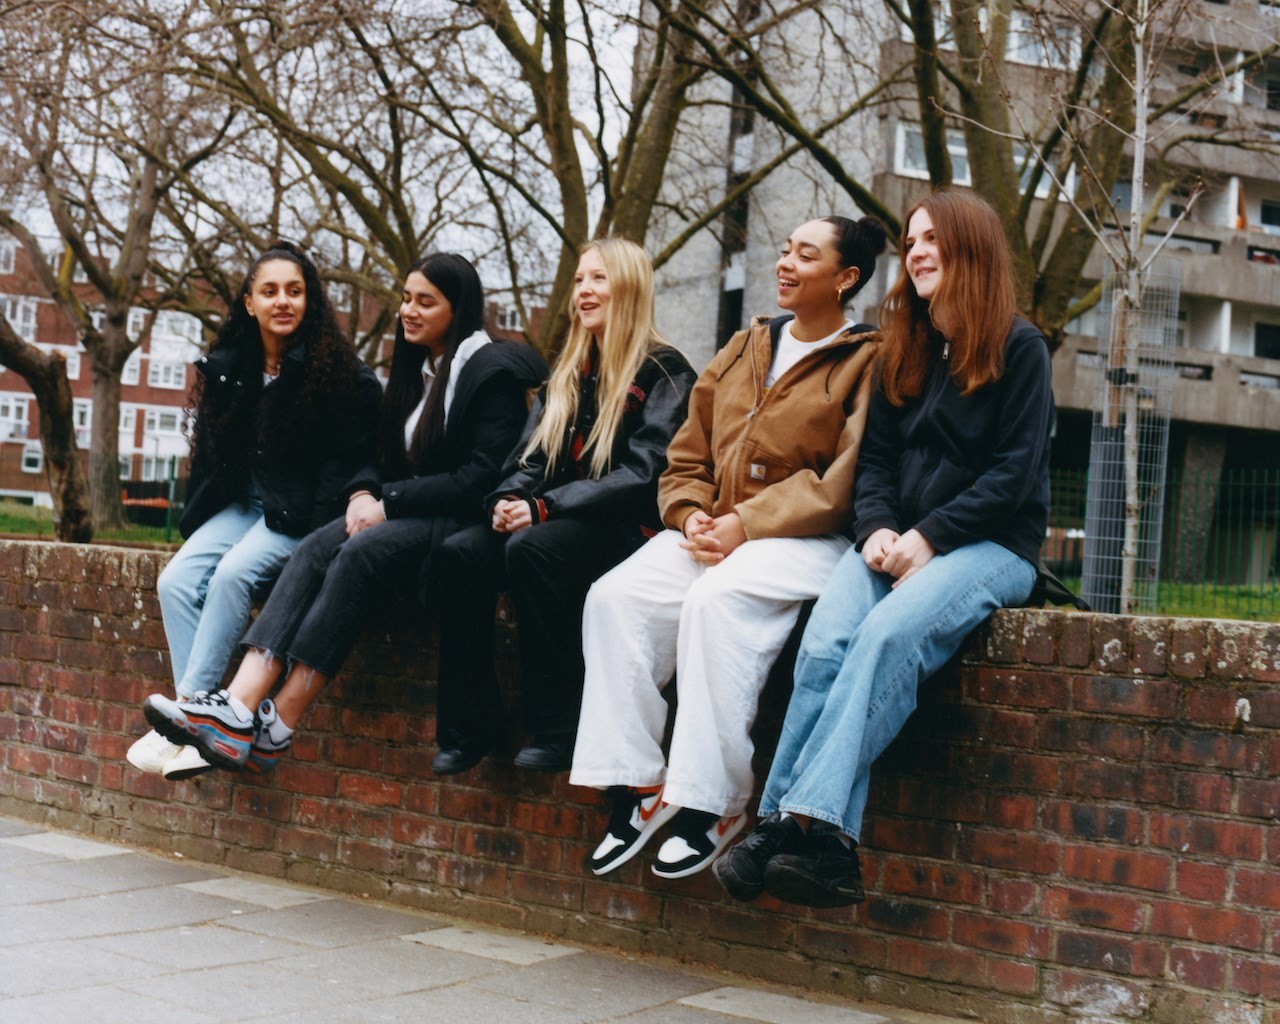 How do London’s teenage girls see the future of the city? 1